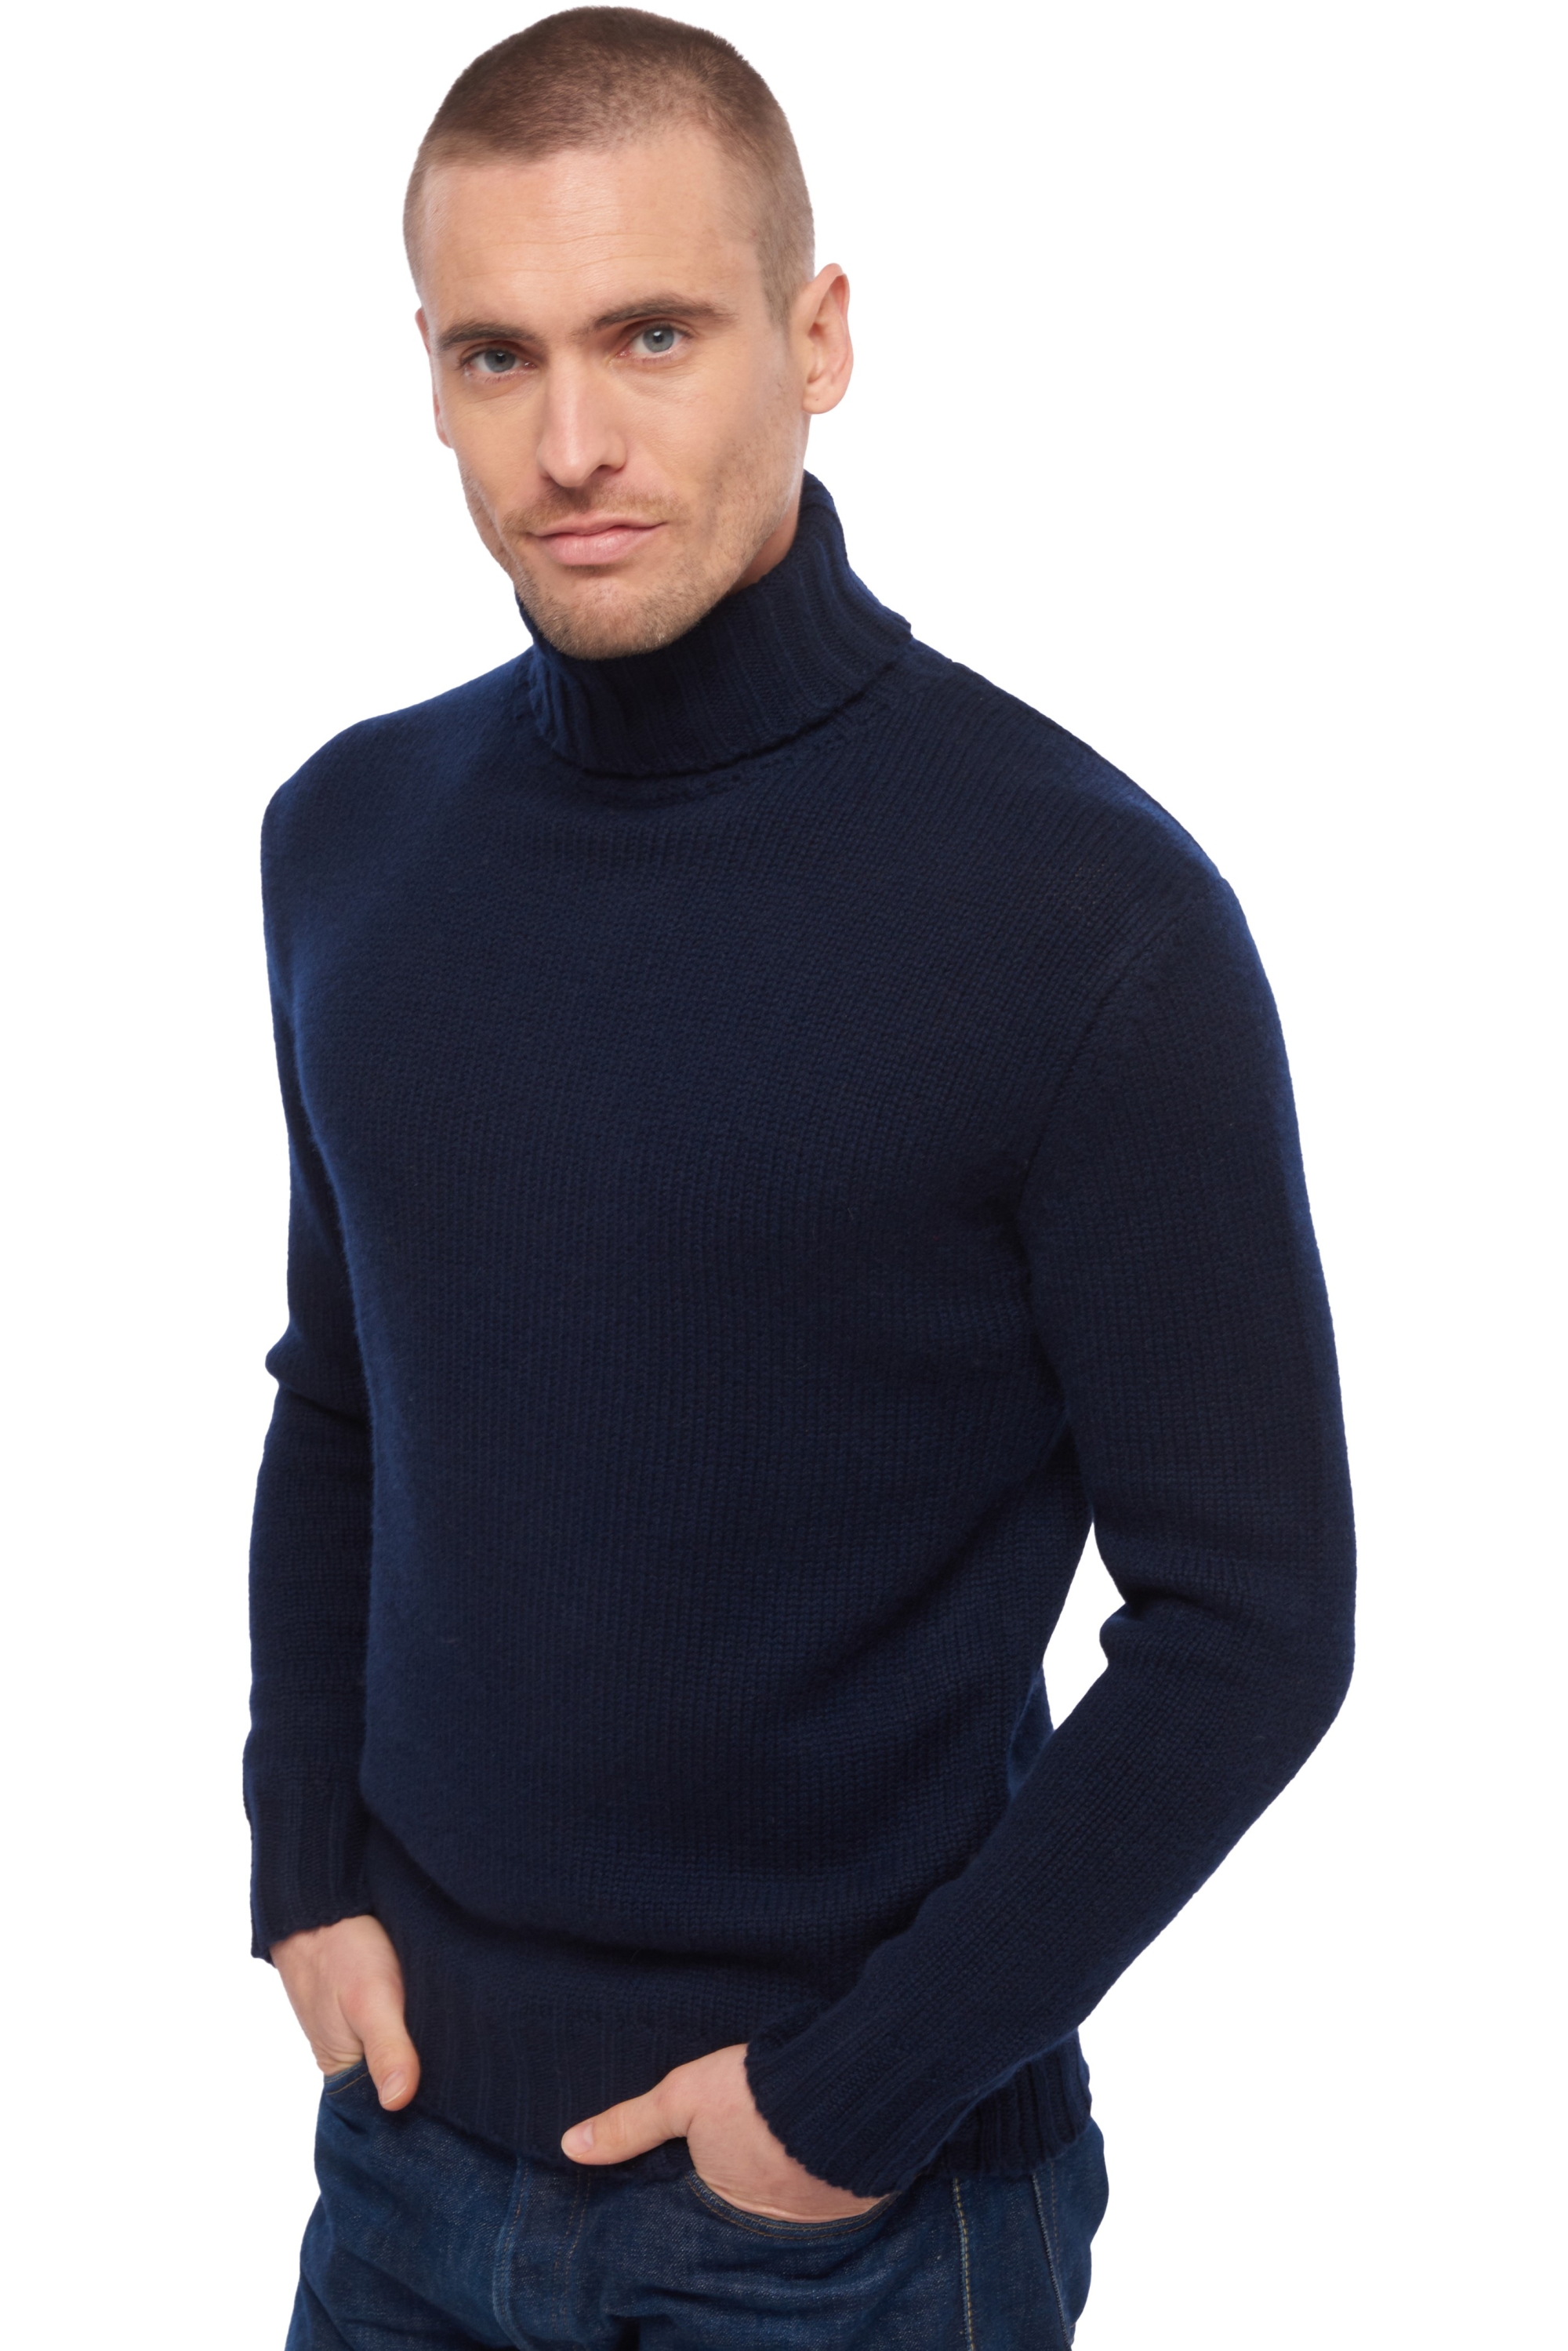 Cachemire pull homme col roule achille marine fonce s